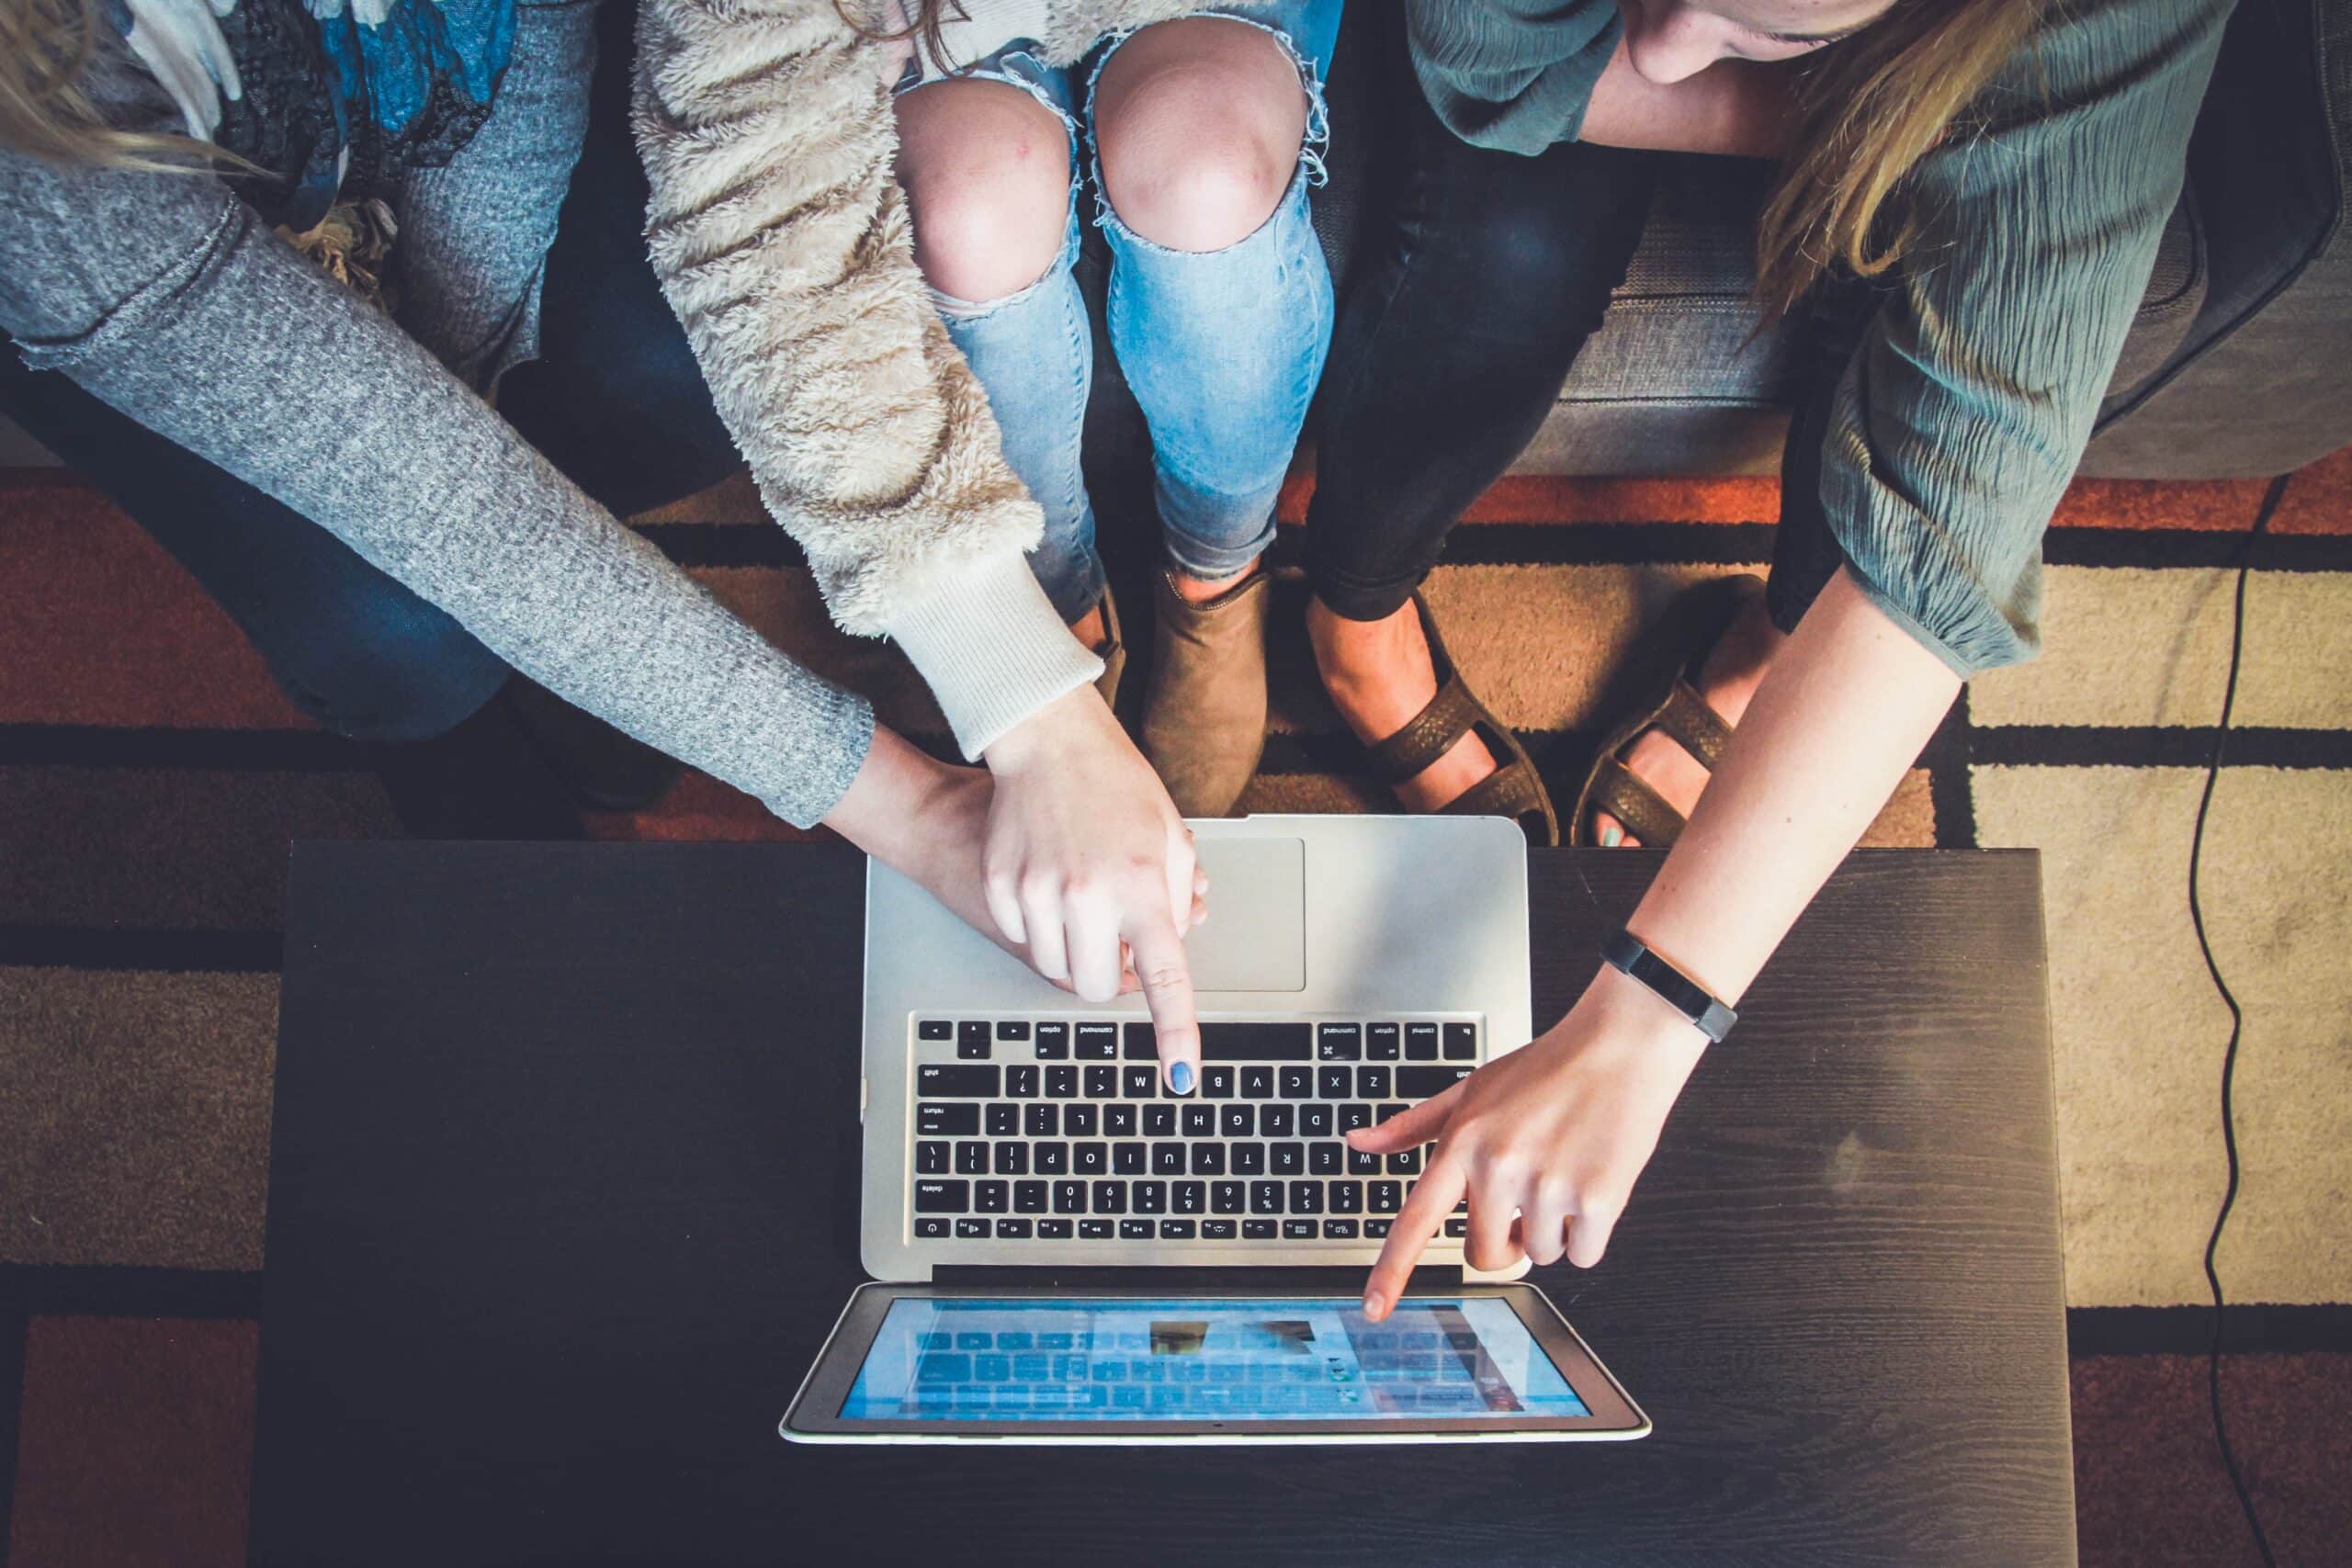 Source: https://unsplash.com/photos/three-person-pointing-the-silver-laptop-computer-2FPjlAyMQTA Title: Brand Awareness Alt. Title: Influencer Marketing for Event Promotion Description: Three people focusing on a page on a computer